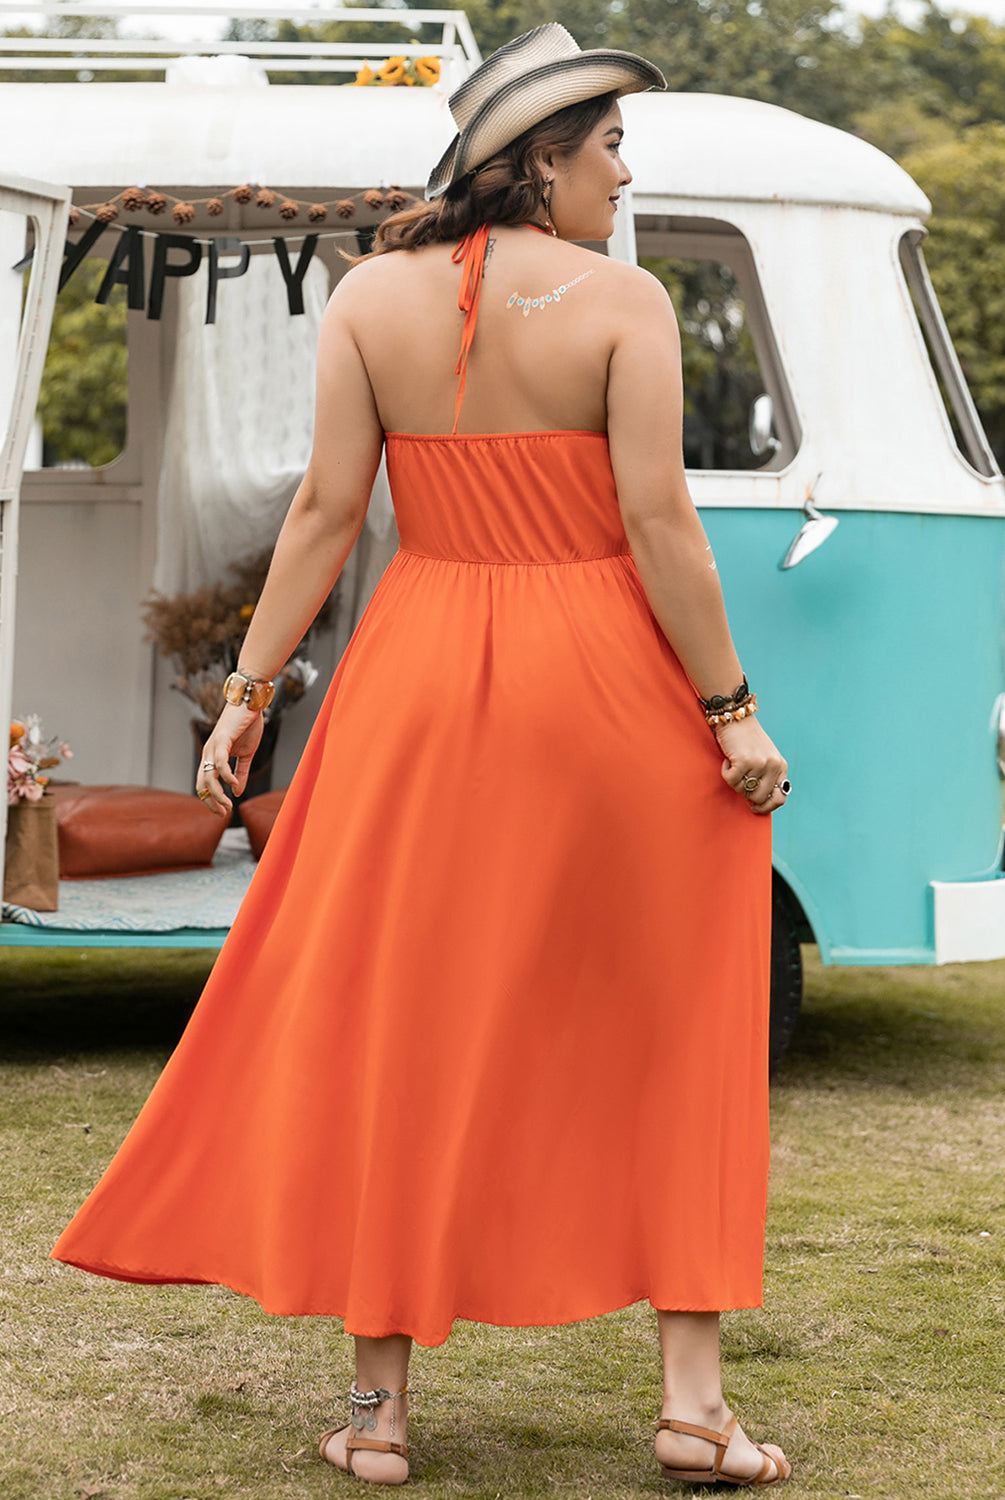 Woman wearing a vibrant orange plus size halter neck midi dress, standing in front of a decorated camper van.